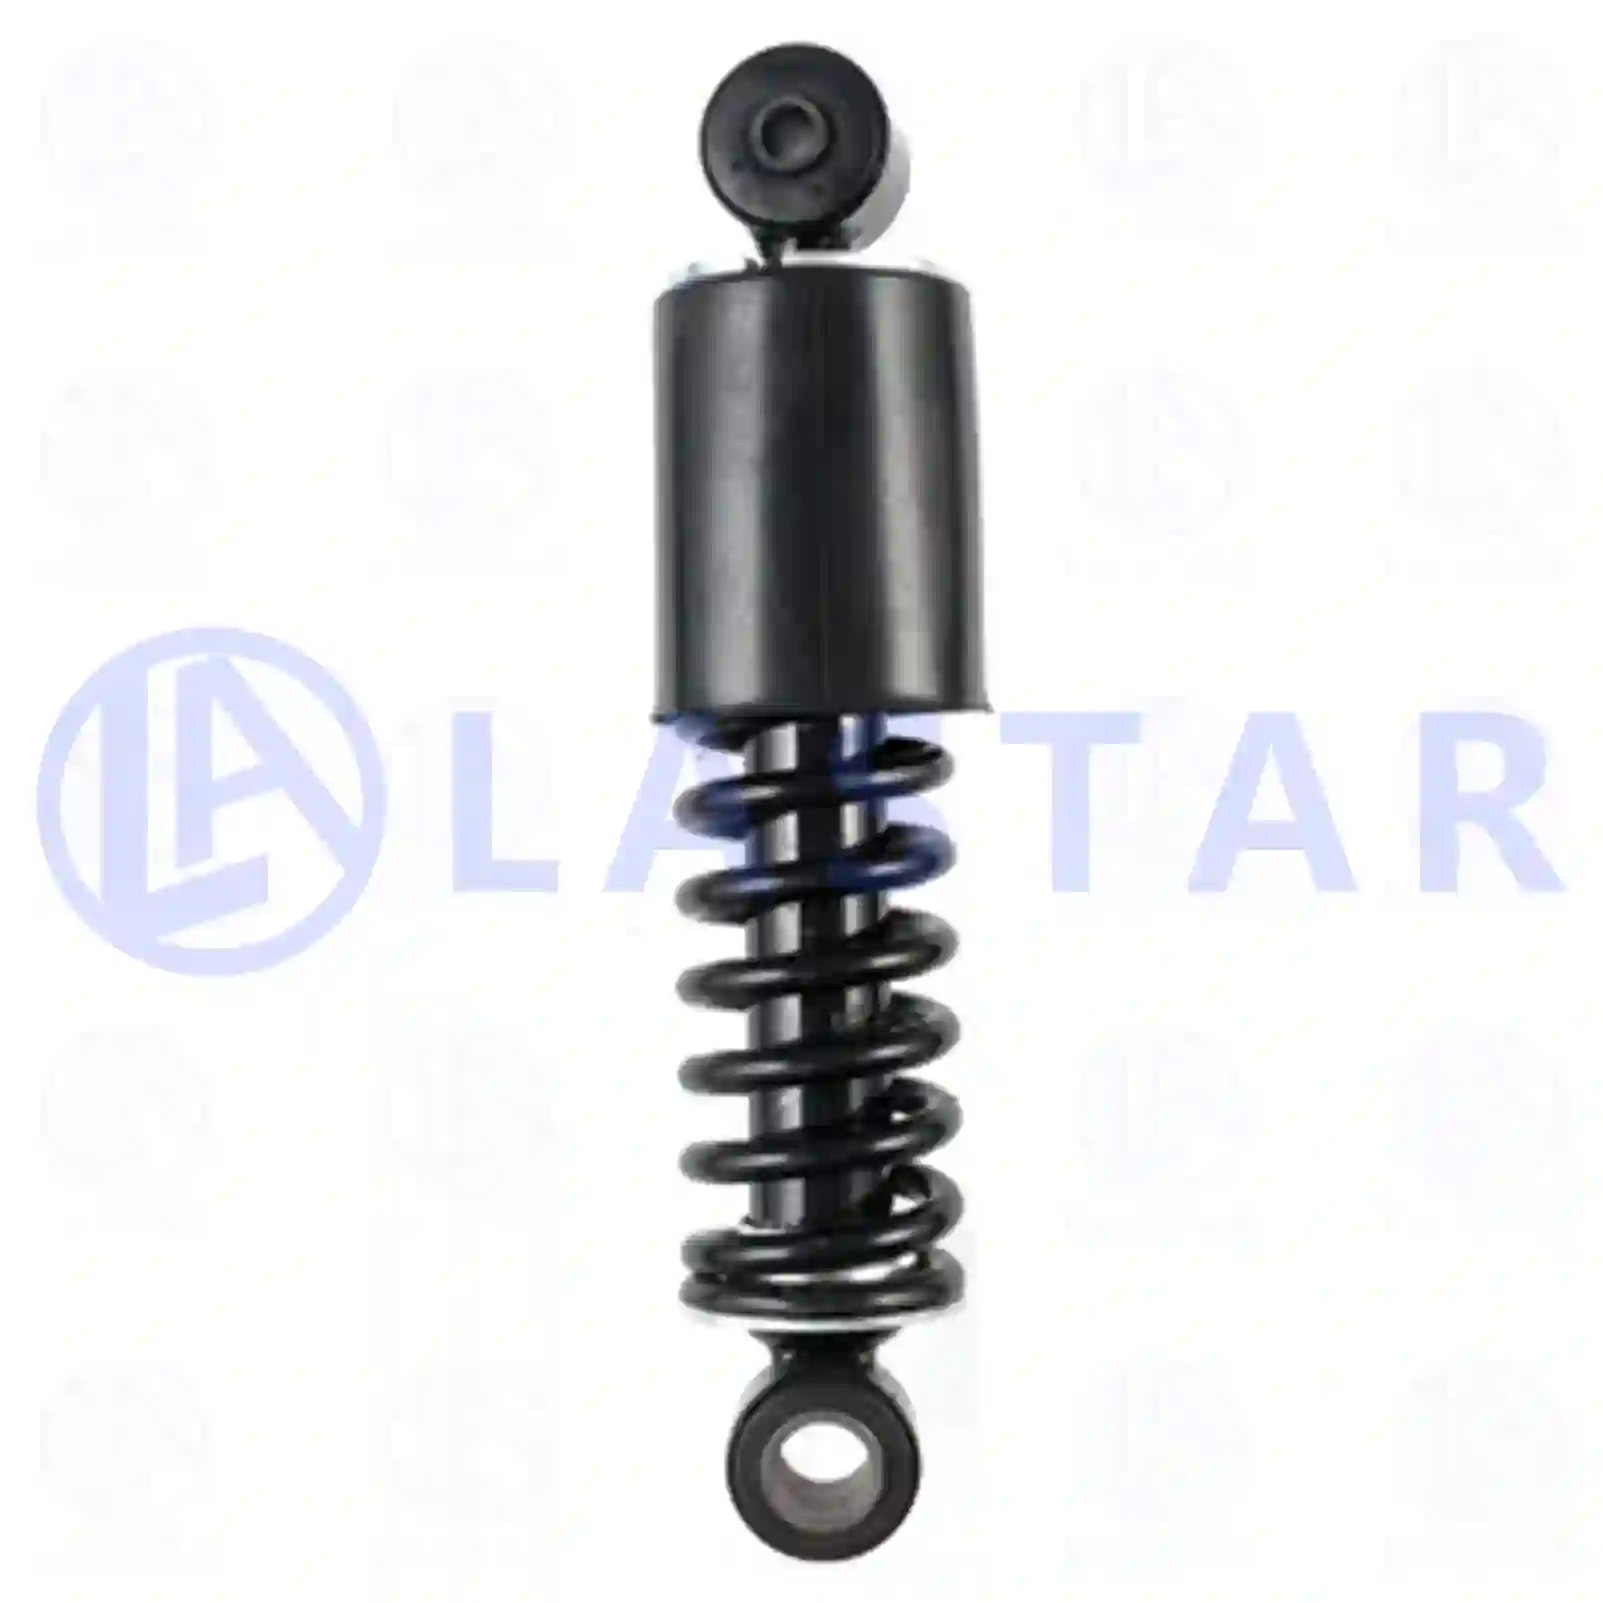 Cabin shock absorber, 77734867, 9428902019, 9428905019, 9428905119 ||  77734867 Lastar Spare Part | Truck Spare Parts, Auotomotive Spare Parts Cabin shock absorber, 77734867, 9428902019, 9428905019, 9428905119 ||  77734867 Lastar Spare Part | Truck Spare Parts, Auotomotive Spare Parts